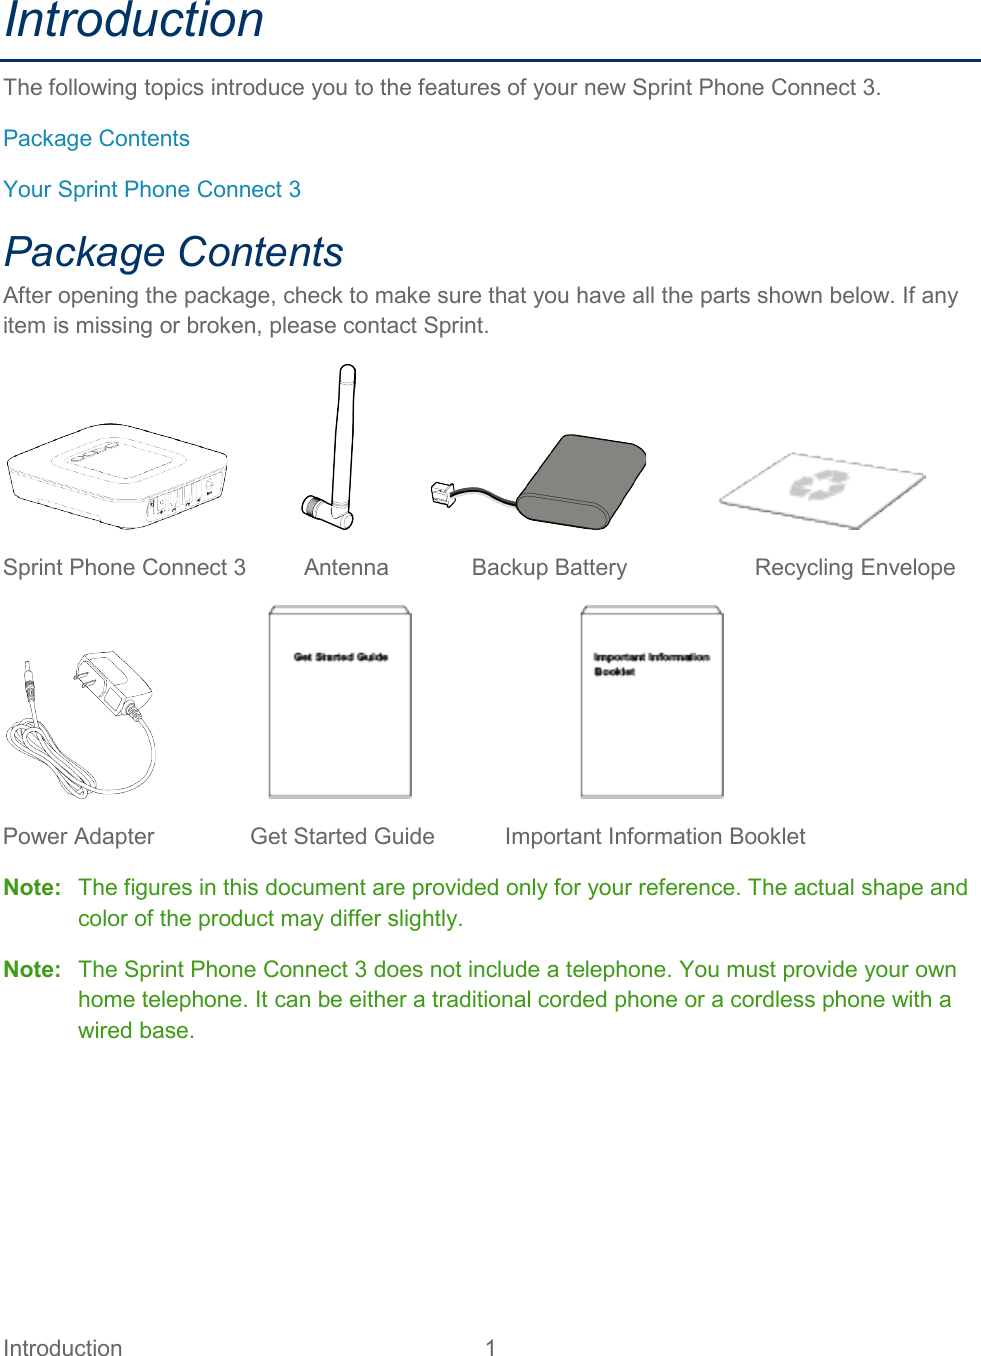 Introduction  1   Introduction The following topics introduce you to the features of your new Sprint Phone Connect 3. Package Contents Your Sprint Phone Connect 3 Package Contents After opening the package, check to make sure that you have all the parts shown below. If any item is missing or broken, please contact Sprint.                                      Sprint Phone Connect 3         Antenna             Backup Battery                    Recycling Envelope                                               Power Adapter               Get Started Guide           Important Information Booklet Note:   The figures in this document are provided only for your reference. The actual shape and color of the product may differ slightly. Note:   The Sprint Phone Connect 3 does not include a telephone. You must provide your own home telephone. It can be either a traditional corded phone or a cordless phone with a wired base.   